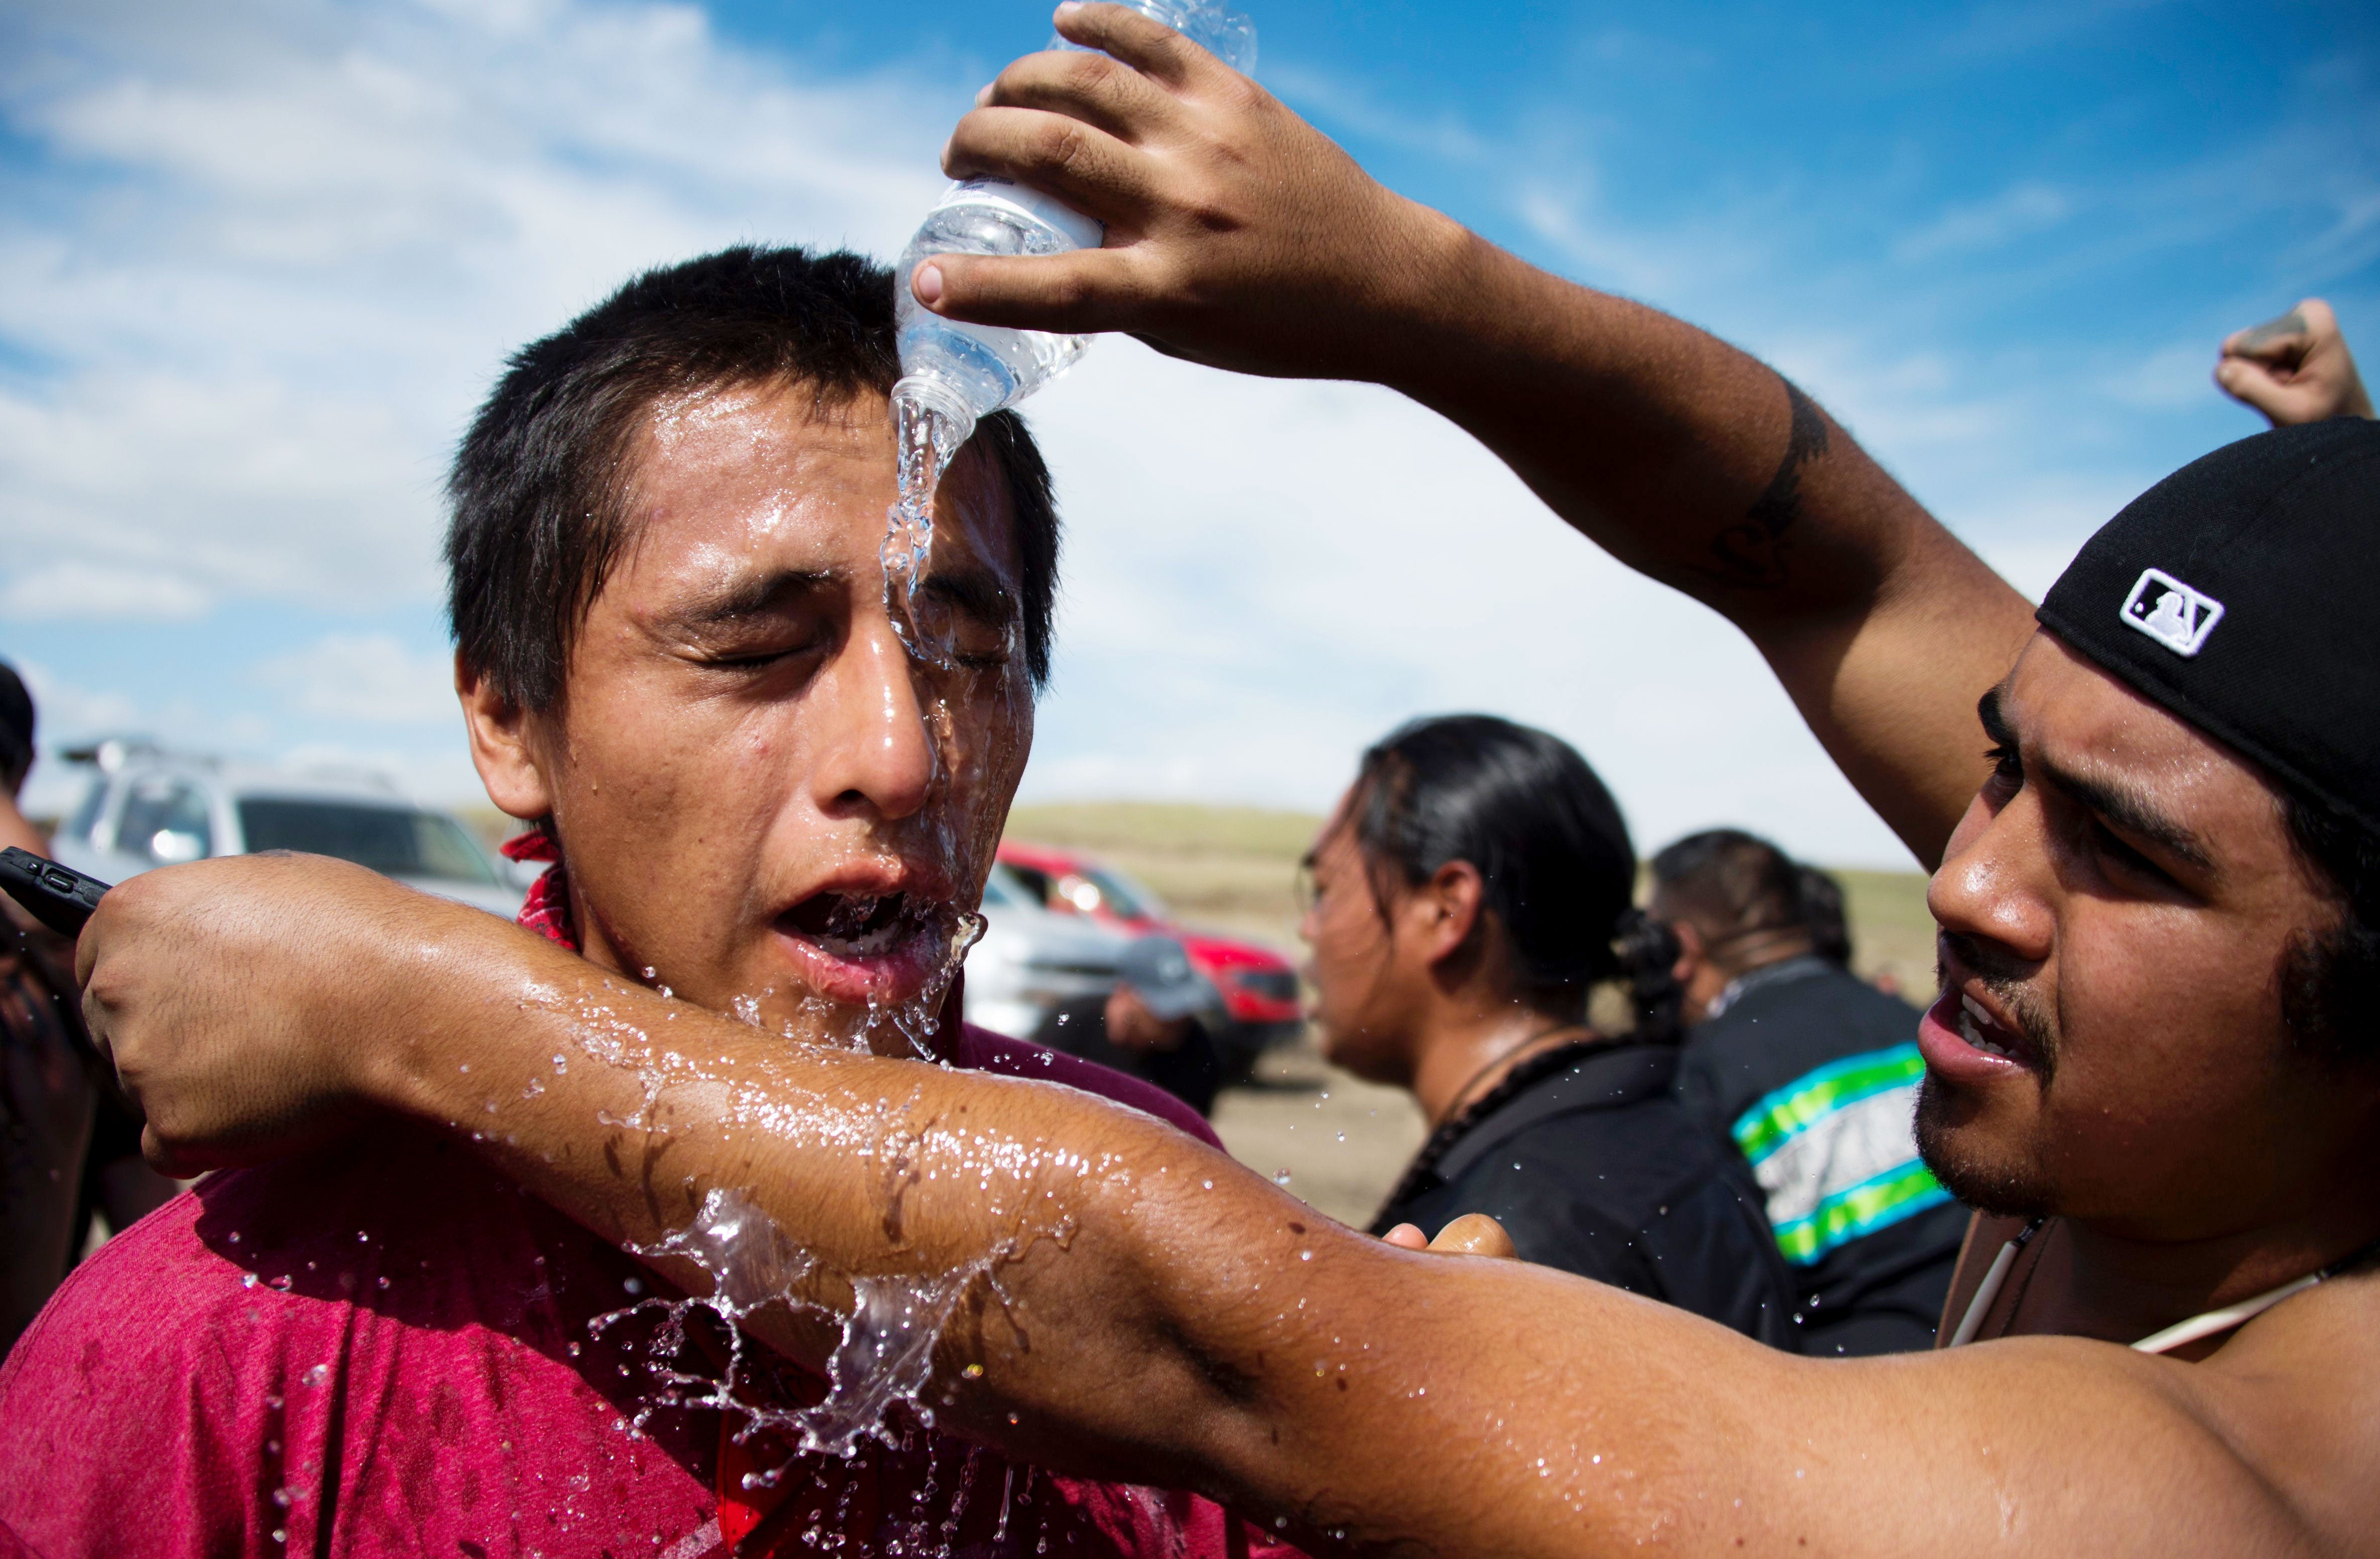 In Solidarity: 28 Powerful Photos From The Dakota Pipeline Protests
